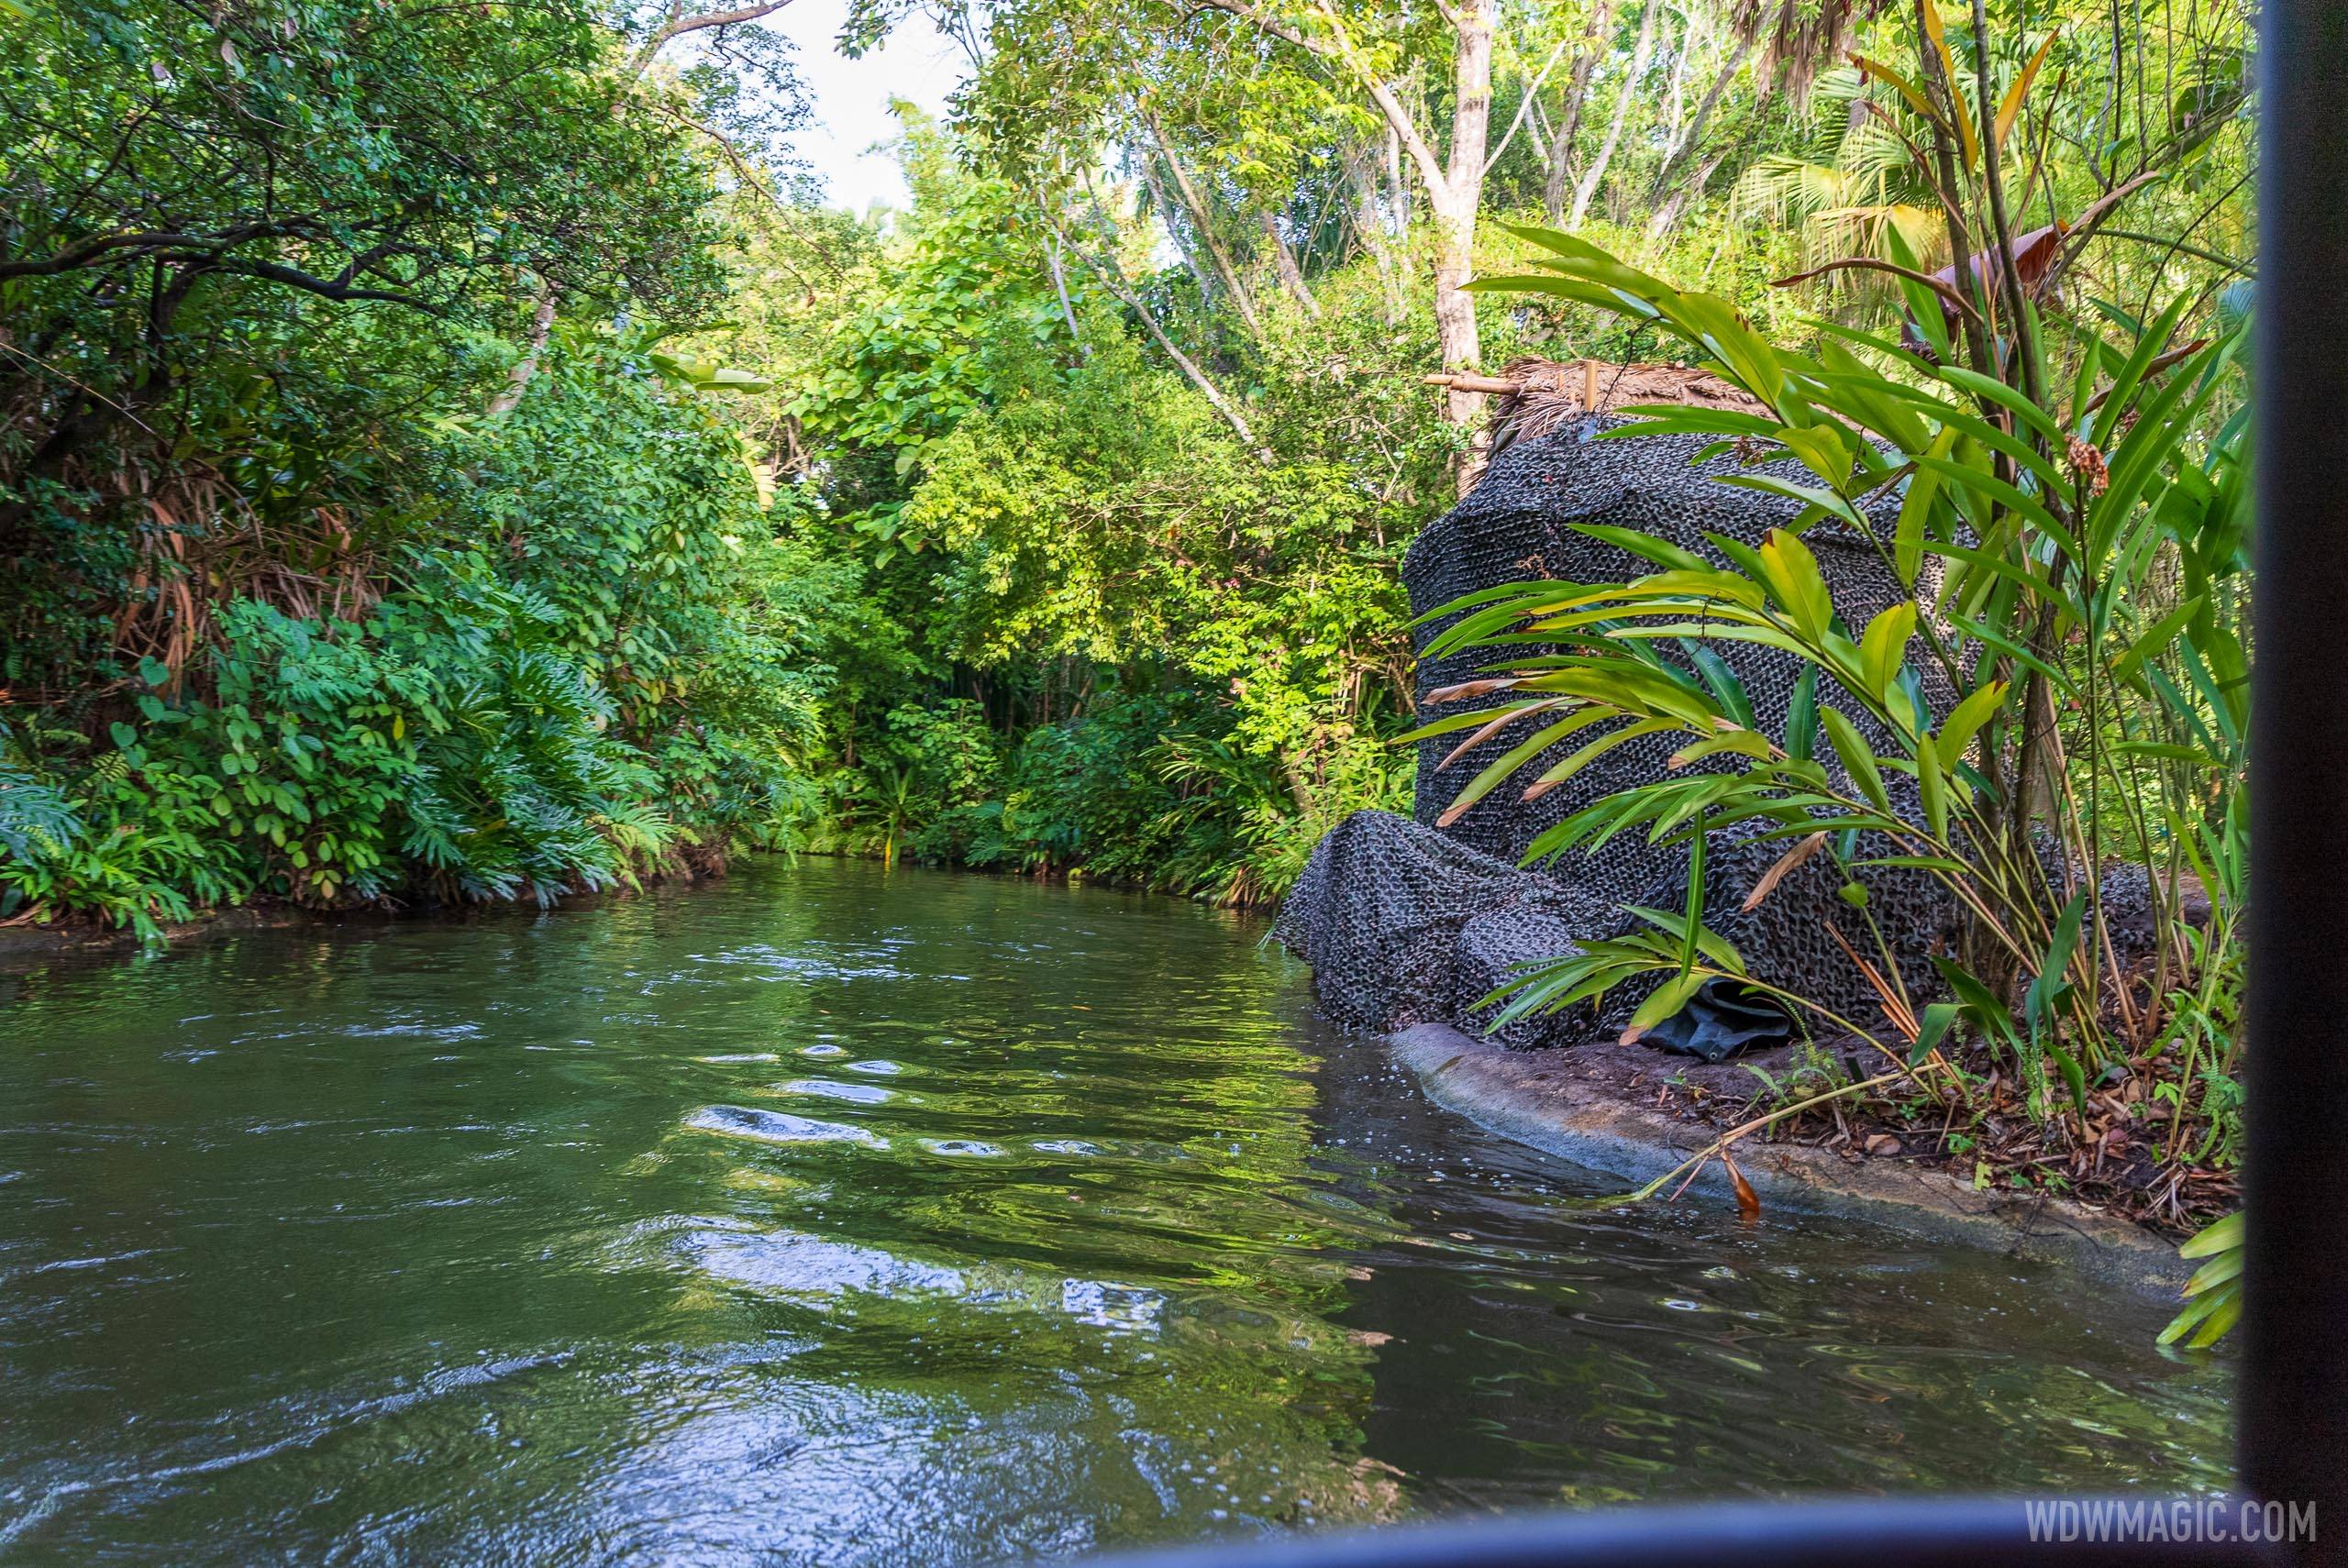 Latest look at the Jungle Cruise changes being made at Walt Disney World